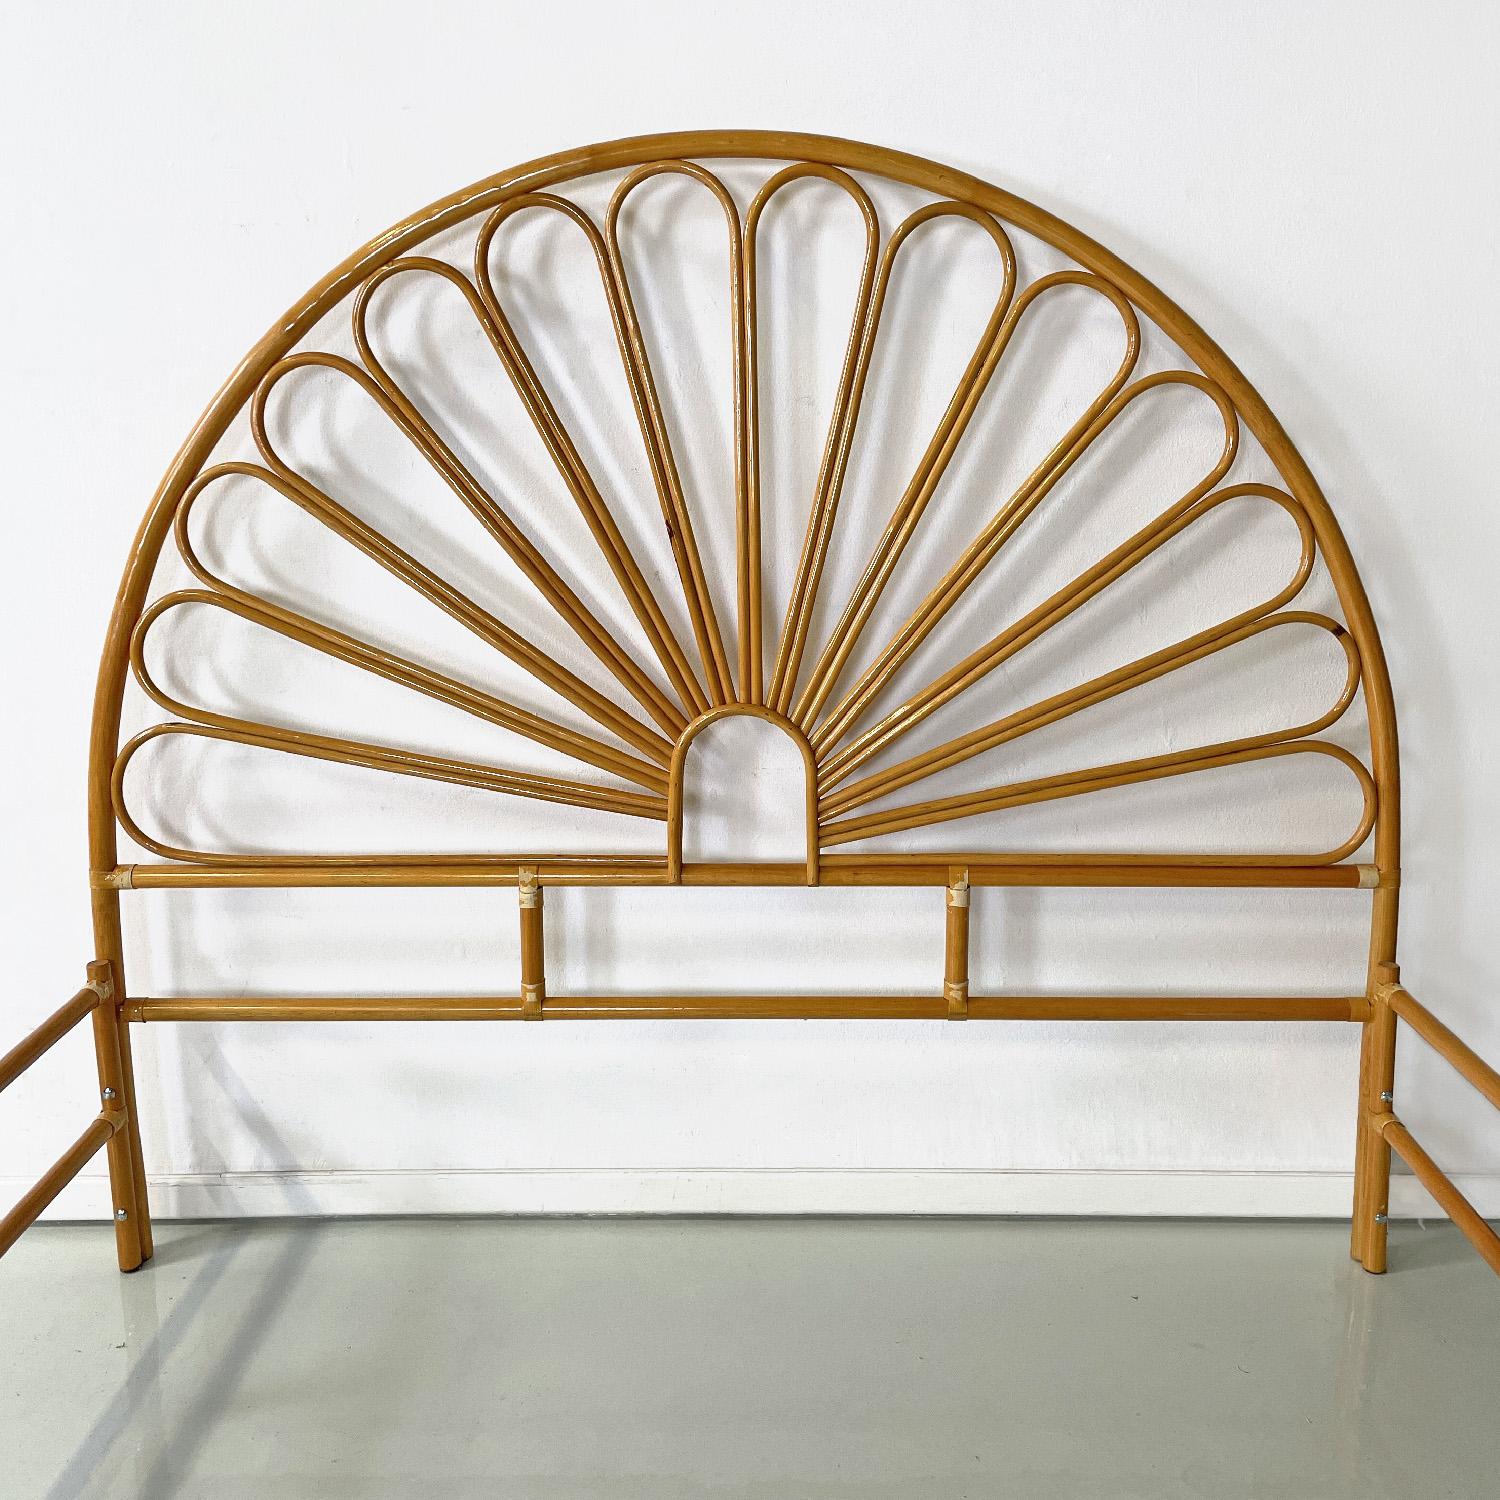 Mid-20th Century Italian mid-century modern bamboo double bed with decorations, 1950s For Sale